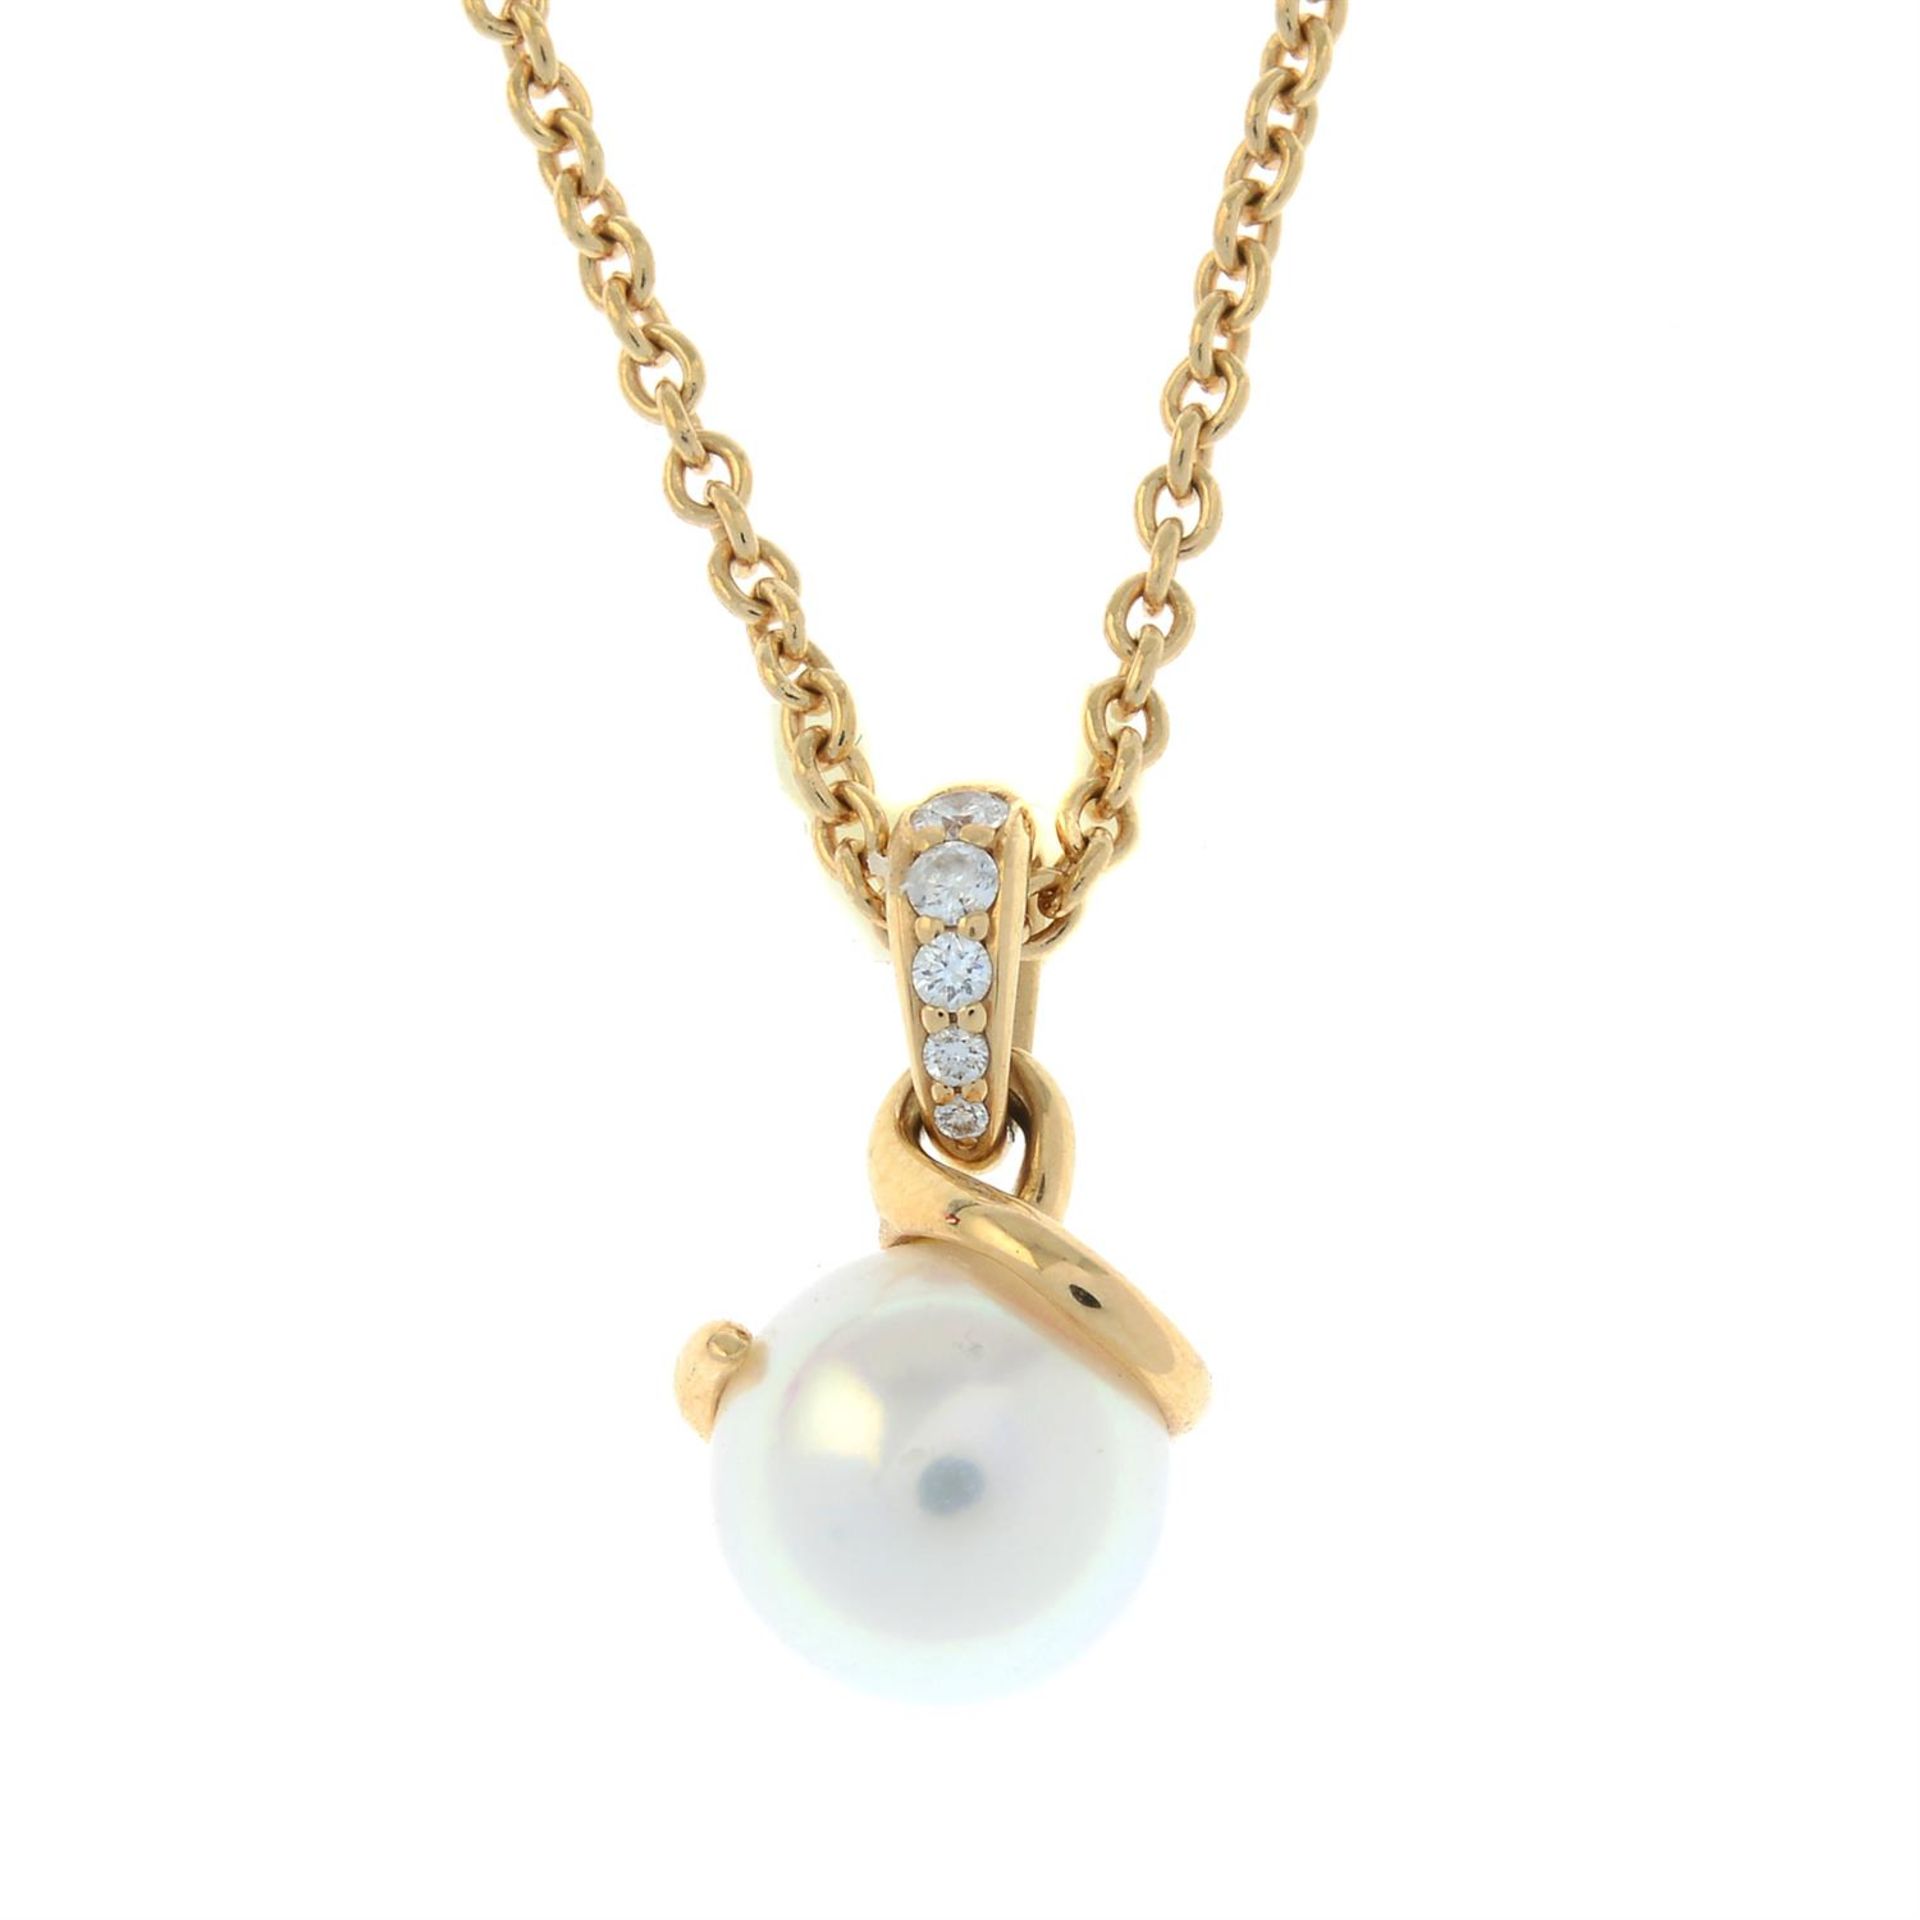 An 18ct gold Akoya cultured pearl and pavé-set diamond 'Twist' pendant, with chain, by Mikimoto. - Image 2 of 5